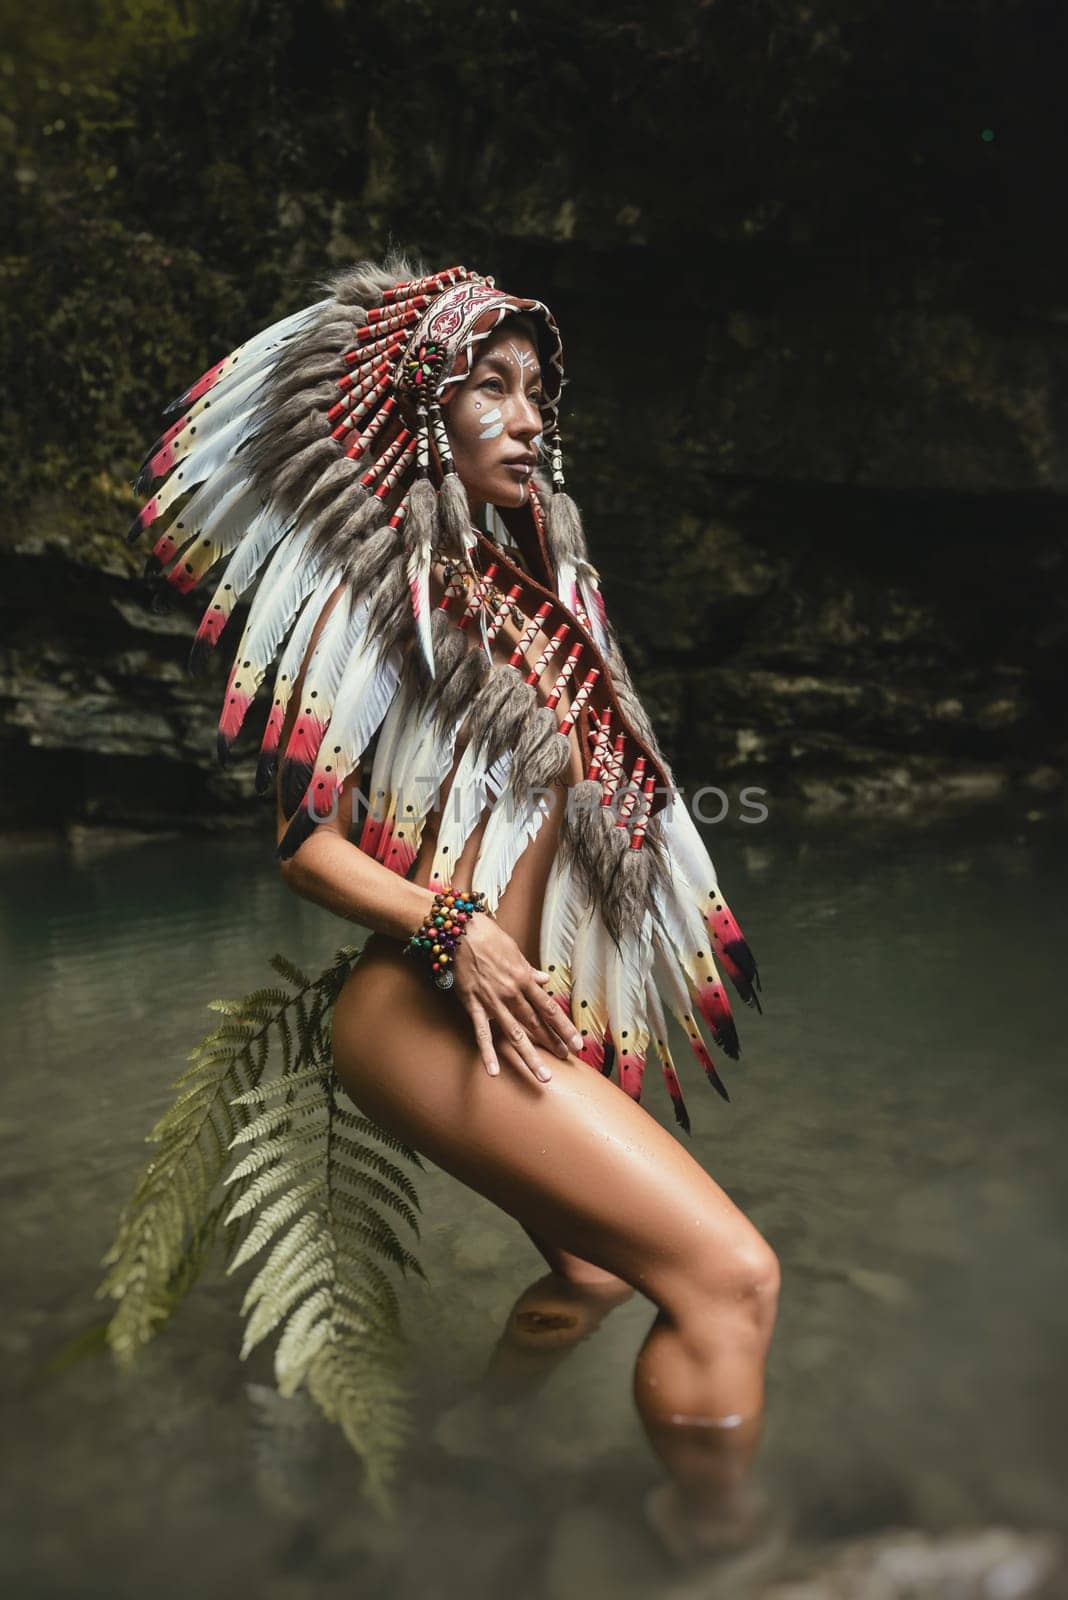 Naked girl in Native American headdresses poses sexually against the backdrop of wildlife with a fern